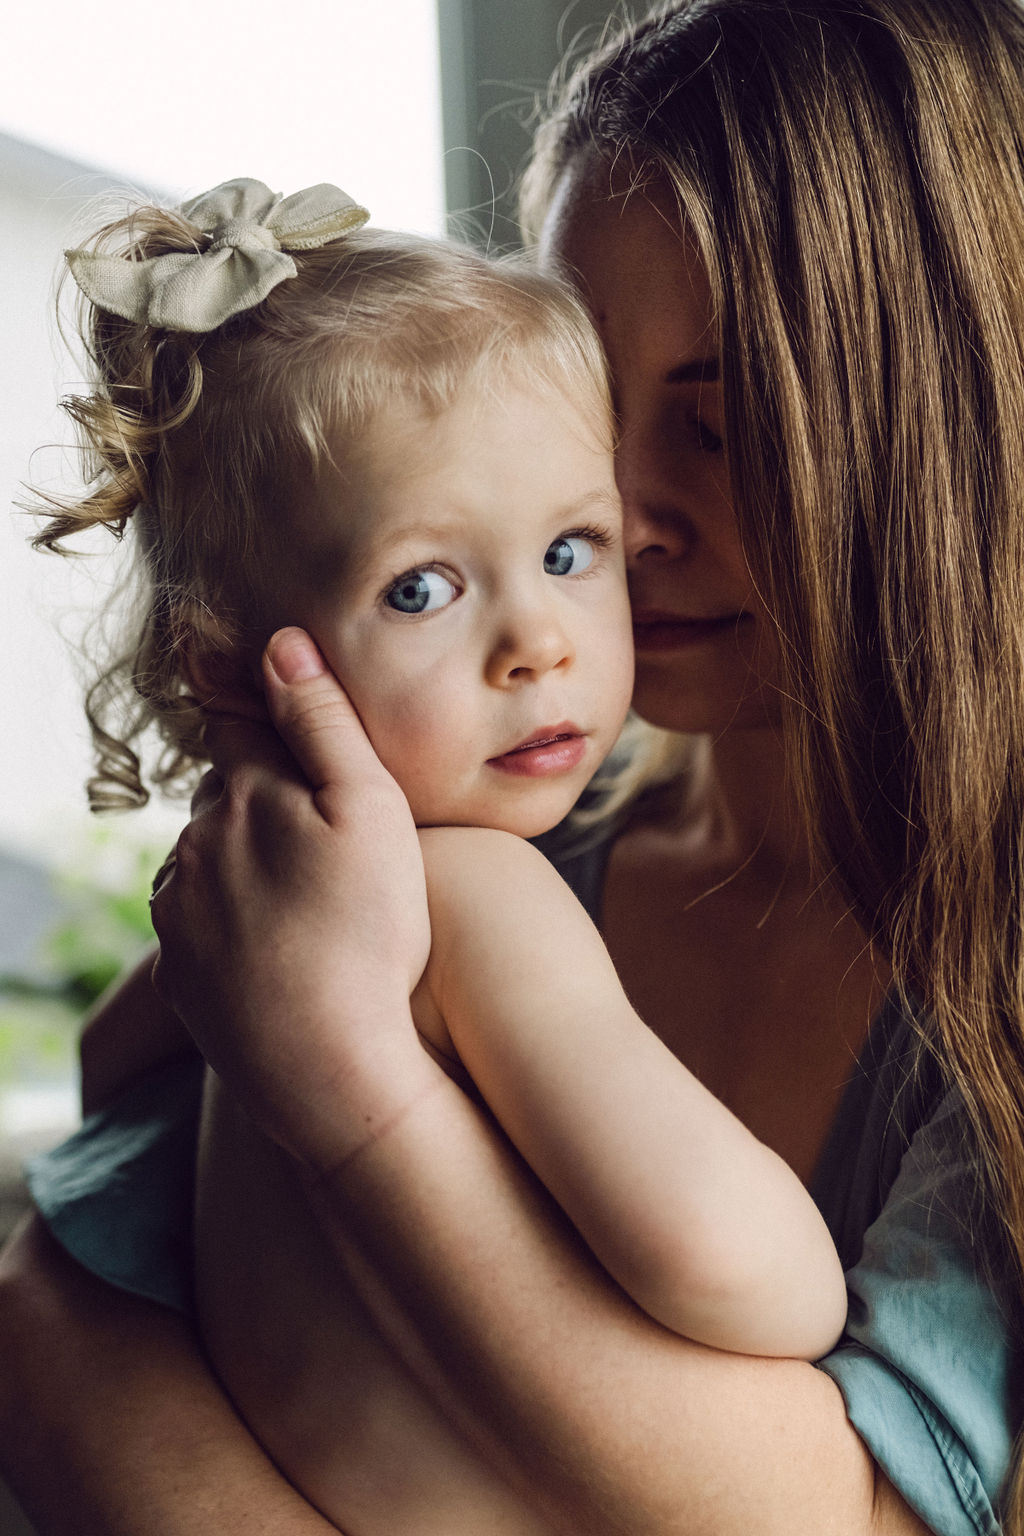 mother, baby connection, photography, boise idaho